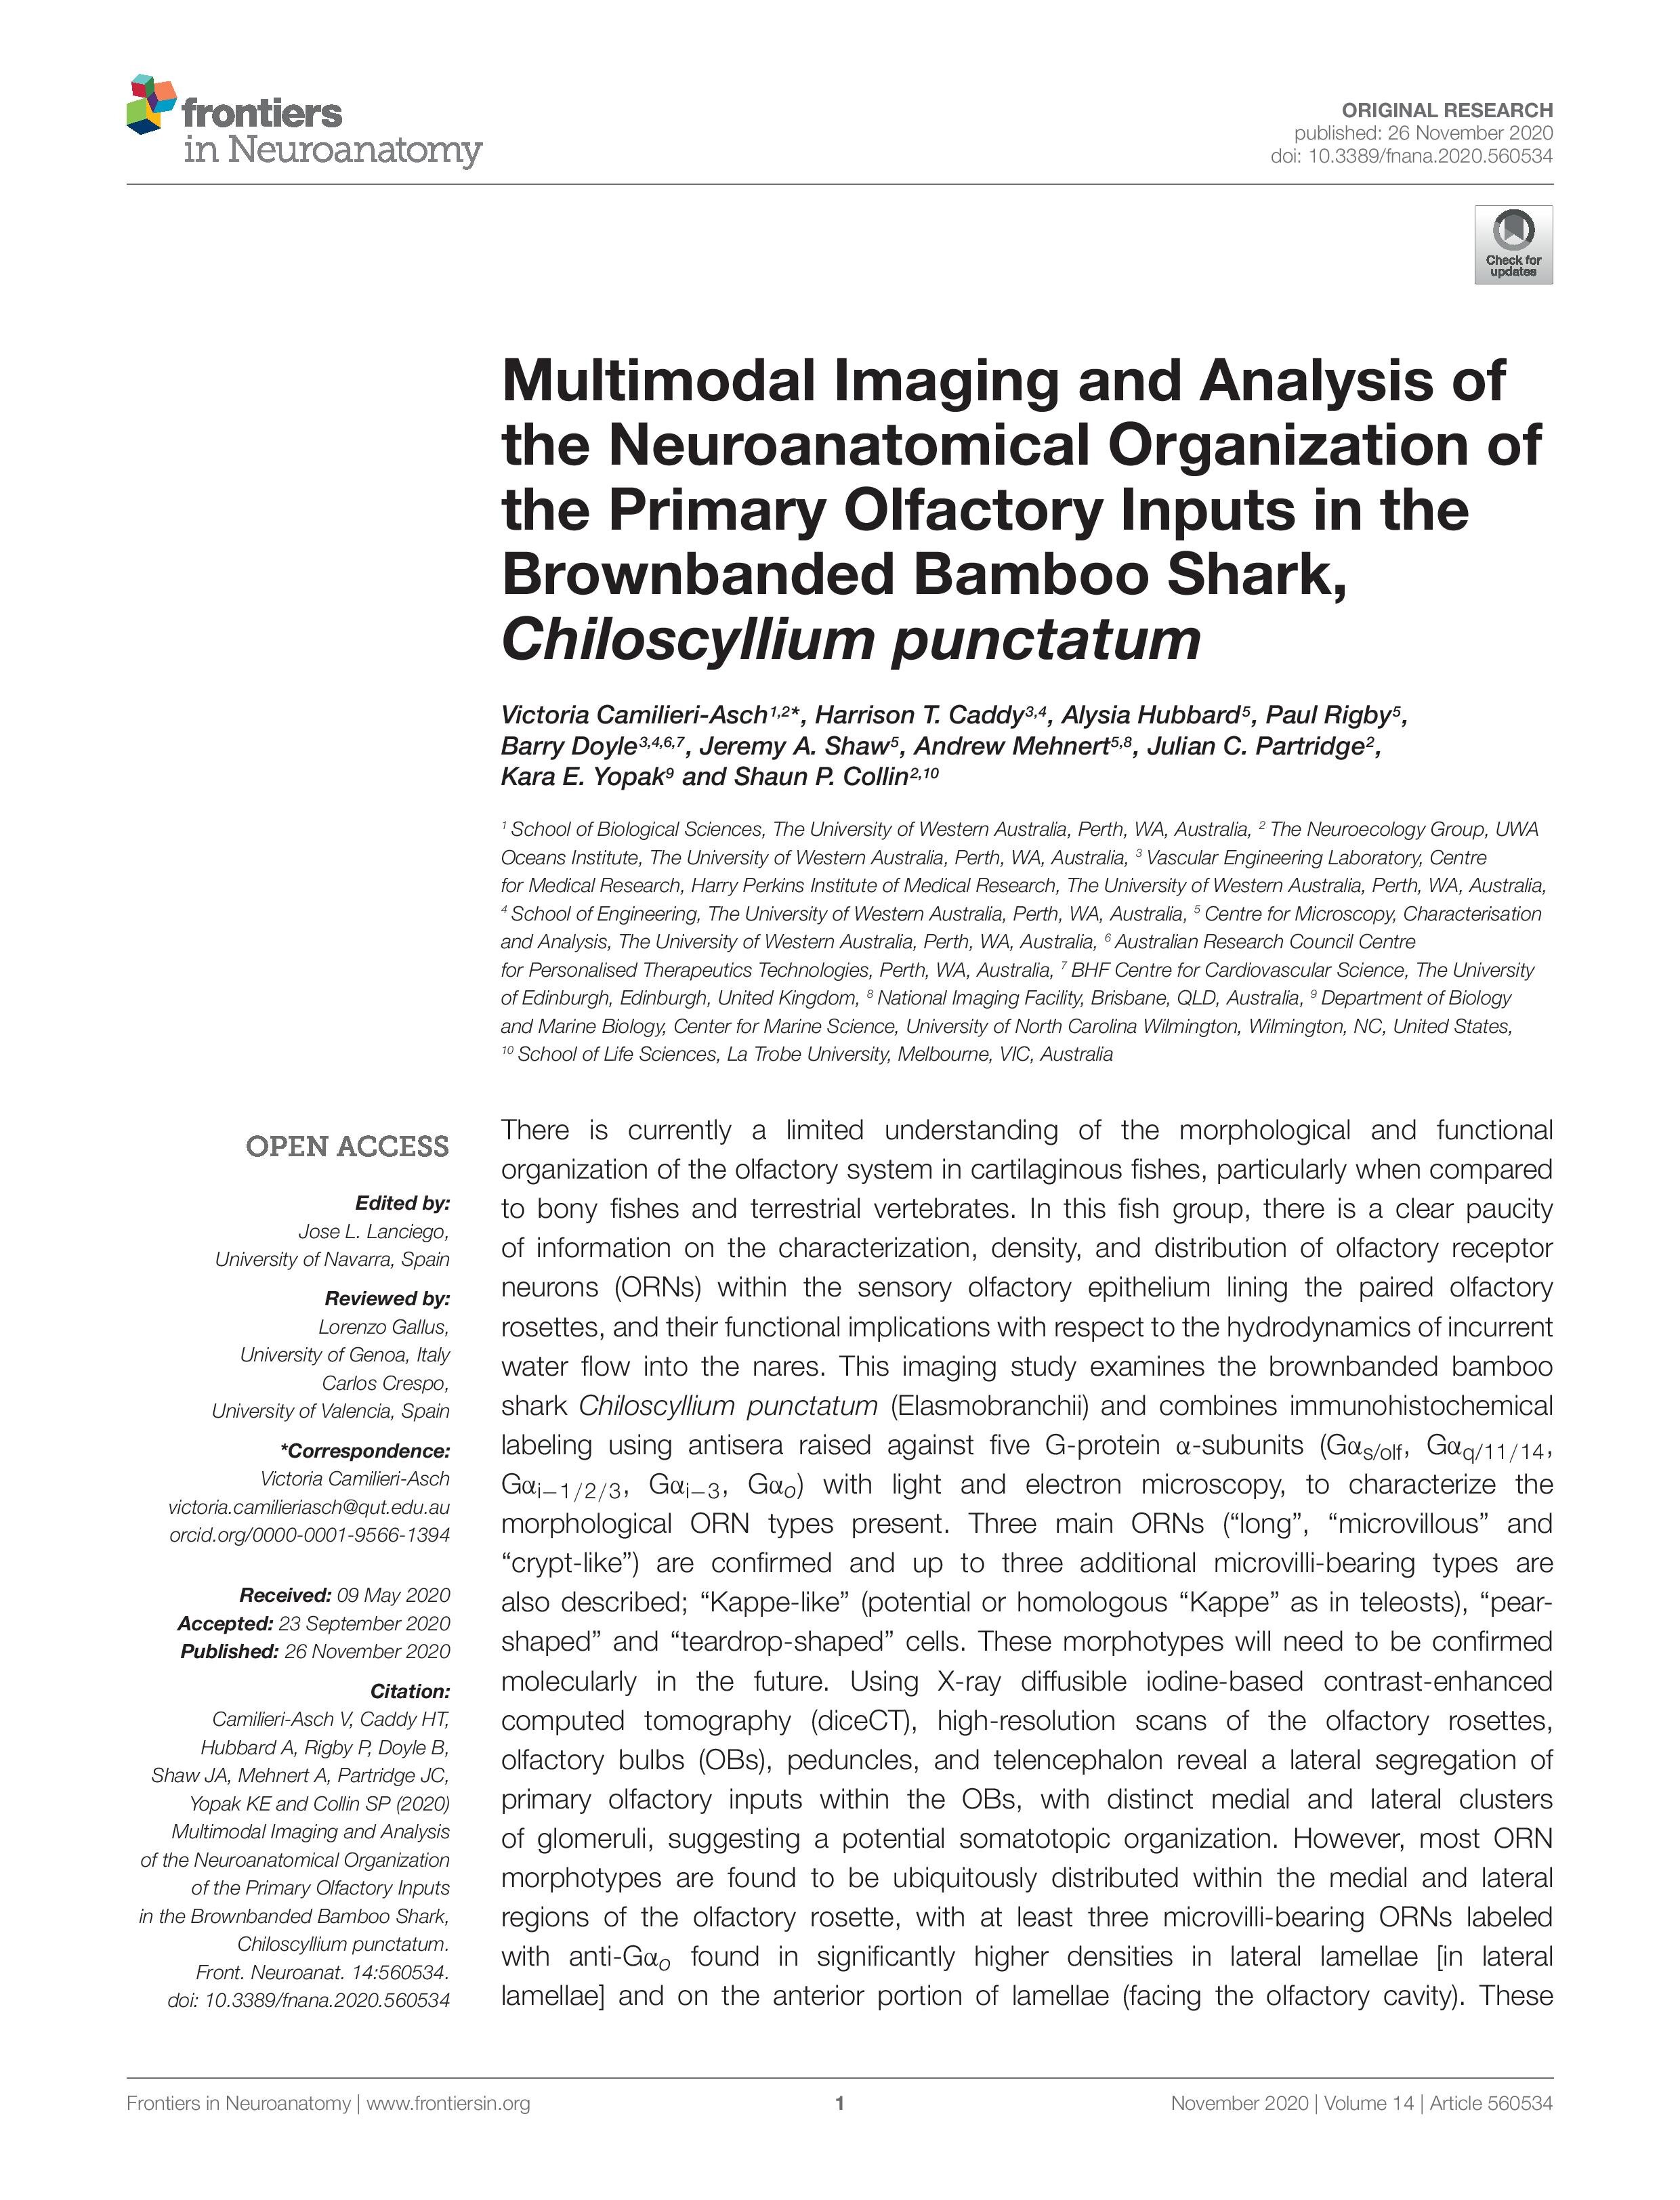 Multimodal Imaging and Analysis of the Neuroanatomical Organization of the Primary Olfactory Inputs in the Brownbanded Bamboo Shark, Chiloscyllium punctatum pg1-page-001.jpg